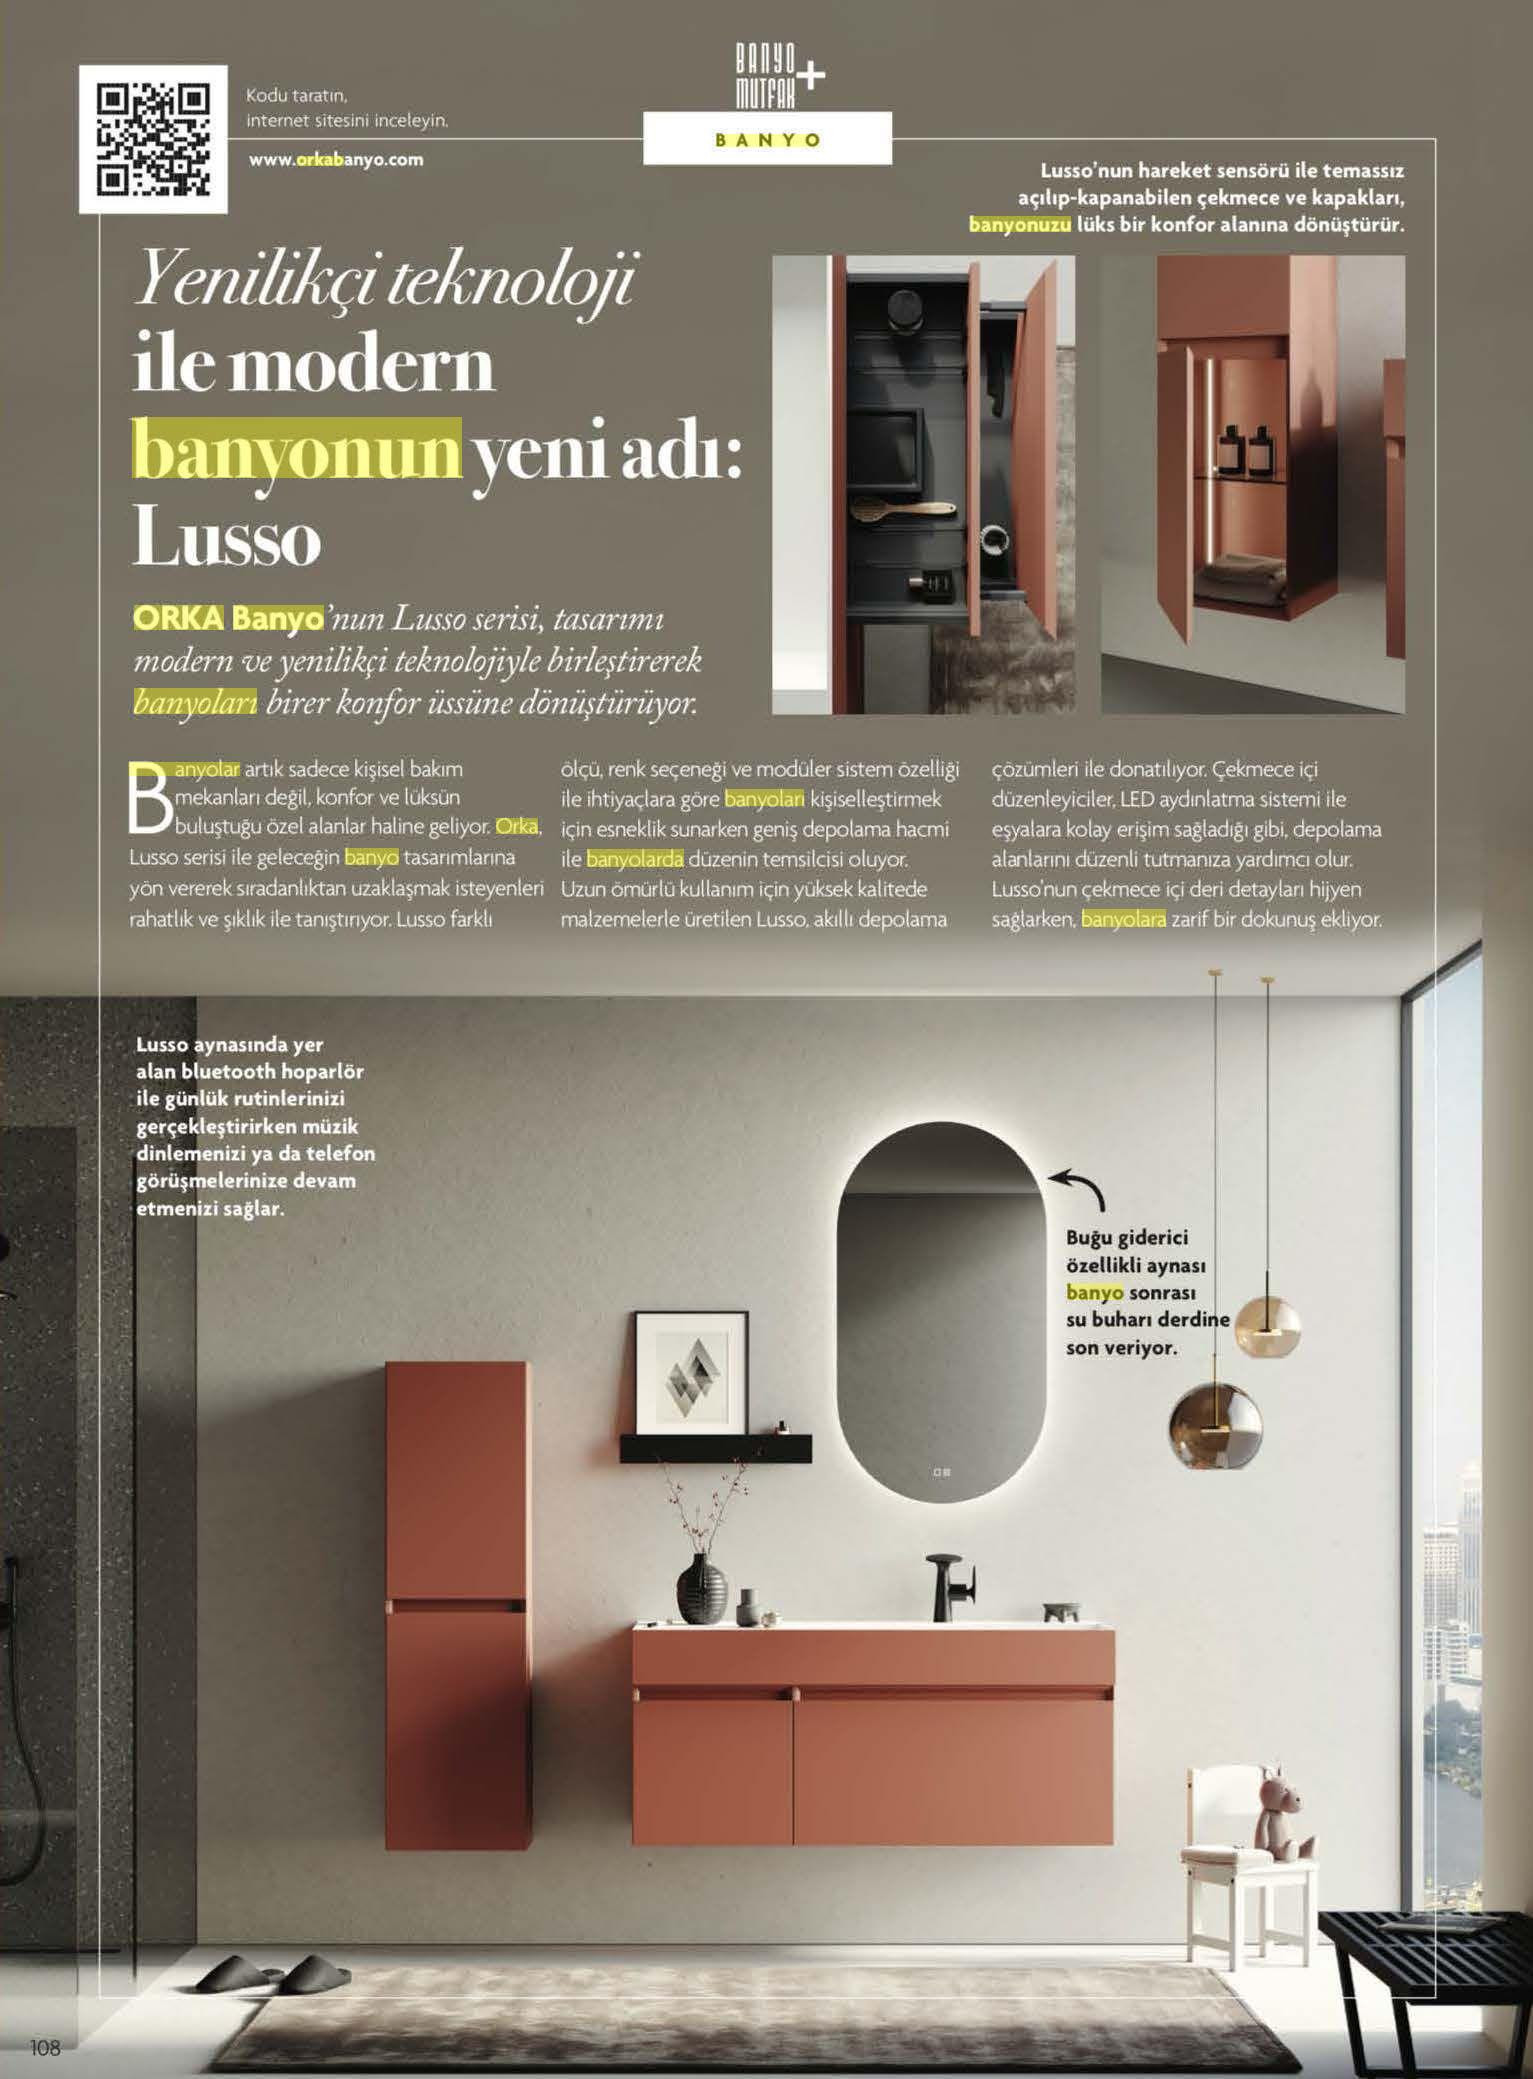 The New Name of the Modern Bathroom with Innovative Technology: Lusso